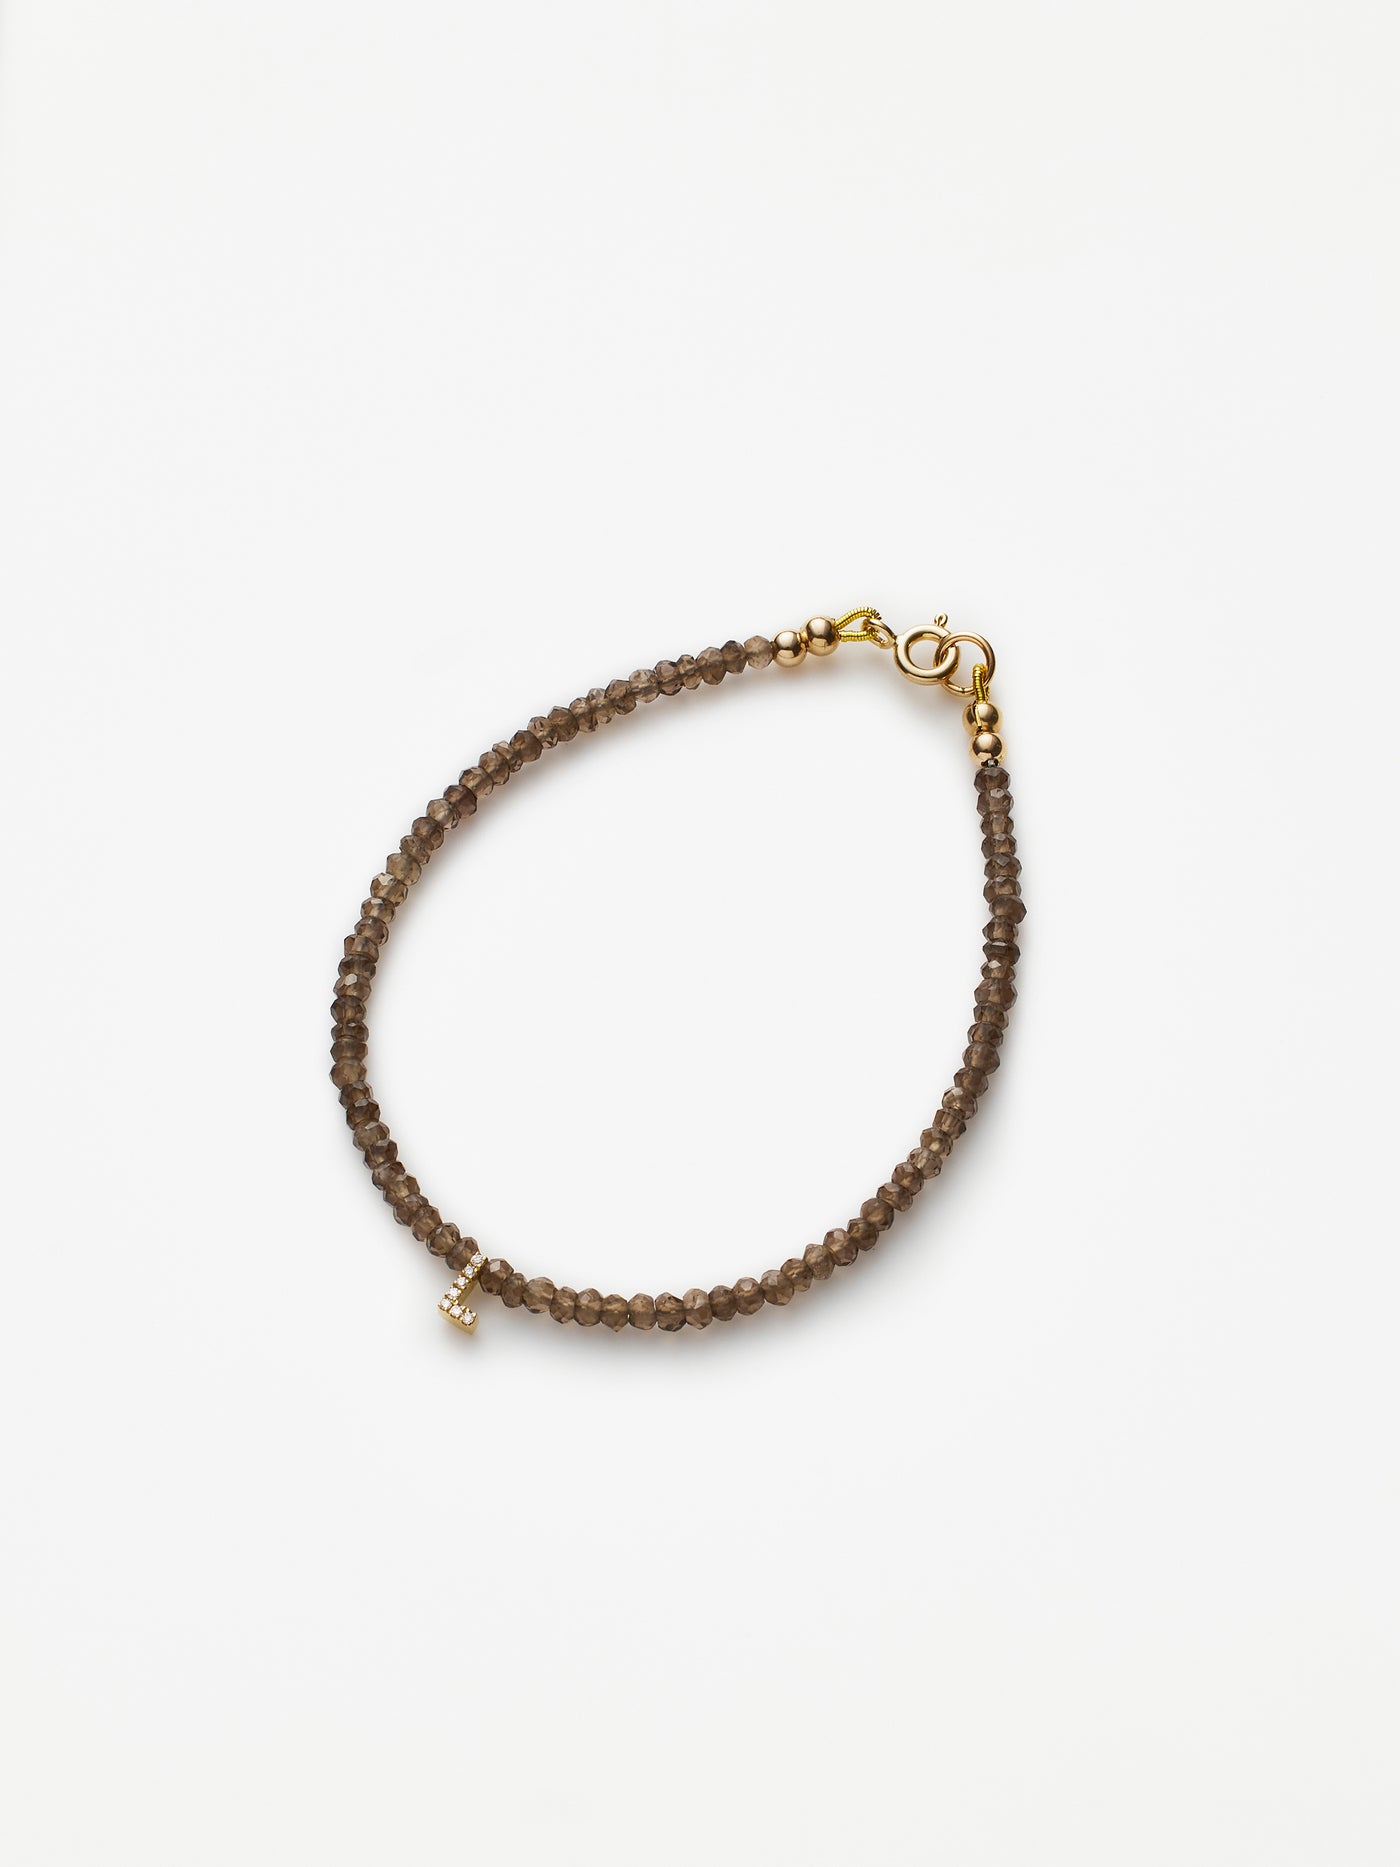 Hand-strung bracelet with natural smoky quartz gemstones and miniature three-dimensional diamond letter in 18k solid gold